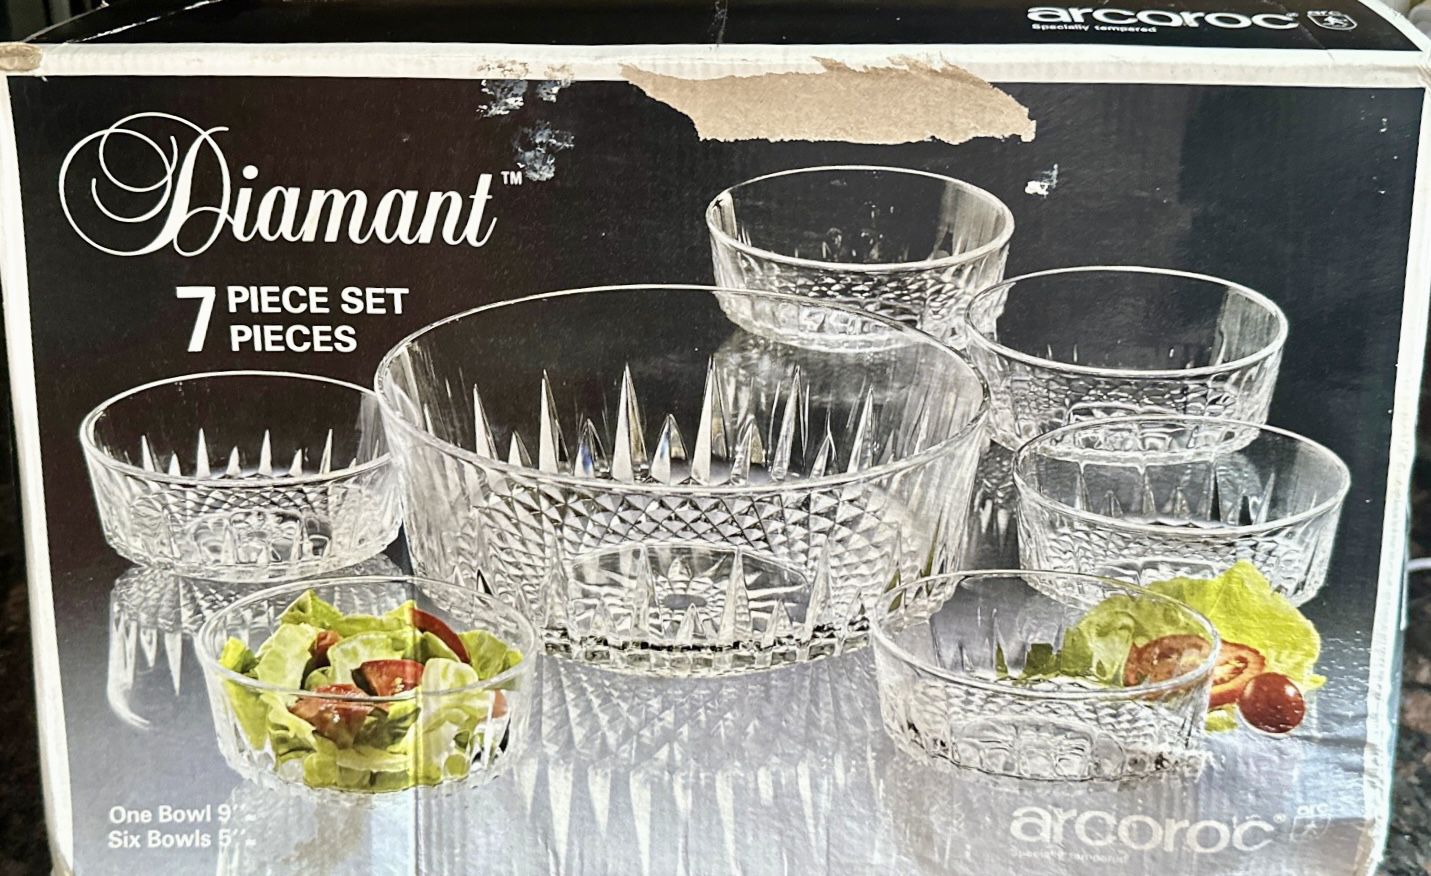 Diamant 7 Piece Salad Bowl Set-Specially Tempered Glass- New in Box.  Vintage-Arcoroc France for Sale in Morton Grove, IL - OfferUp